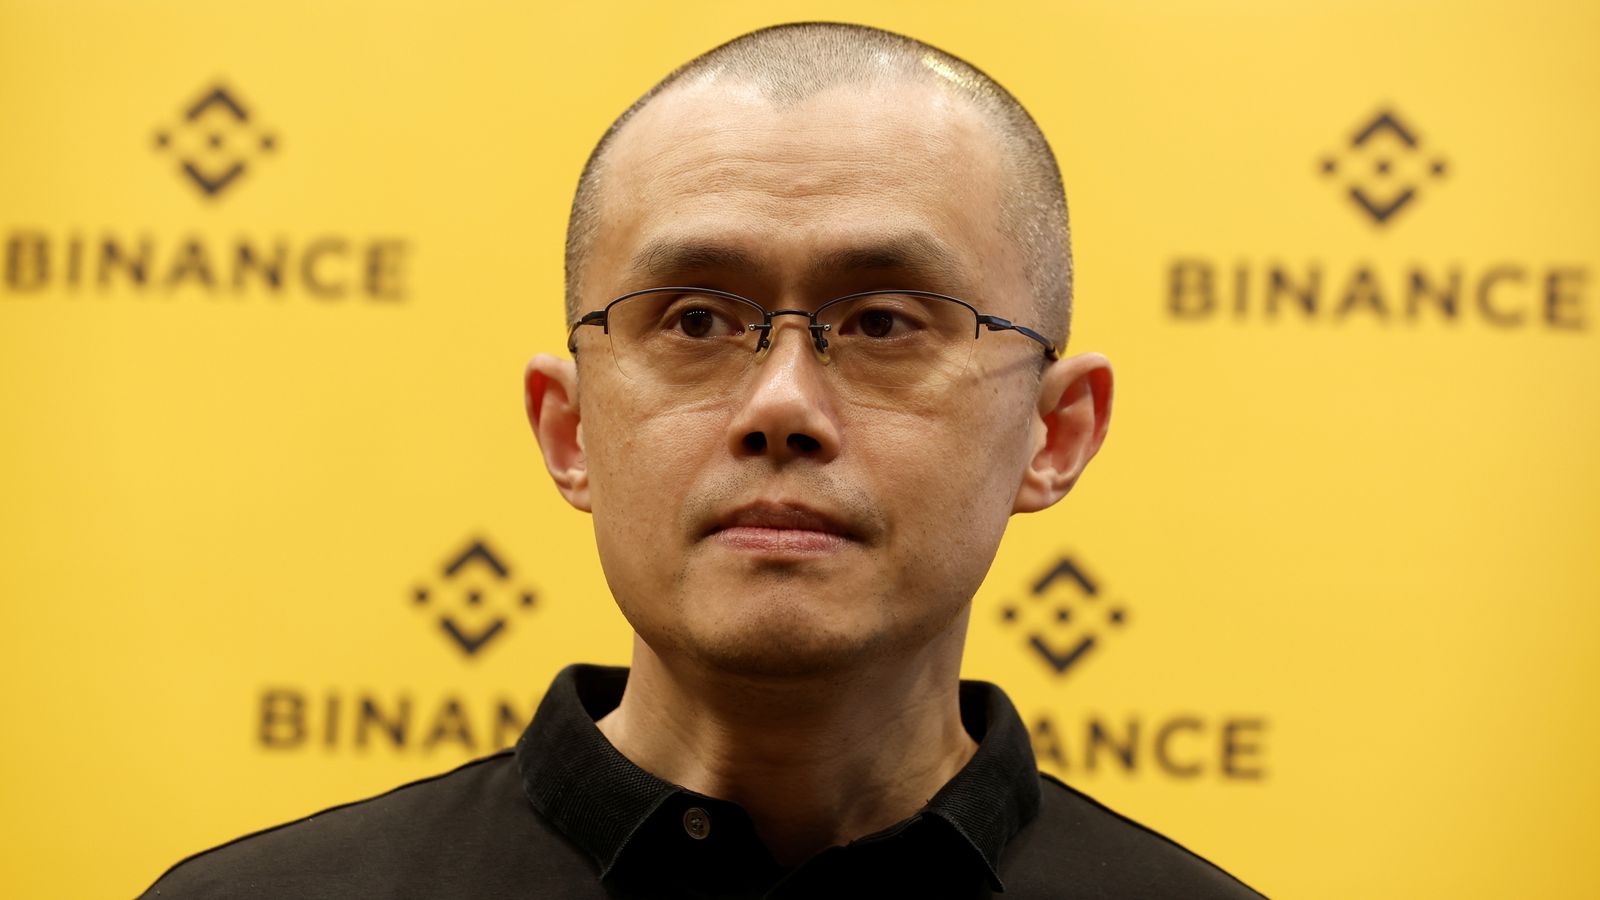 Changpeng Zhao: Former boss of world's largest crypto exchange Binance jailed for allowing money laundering